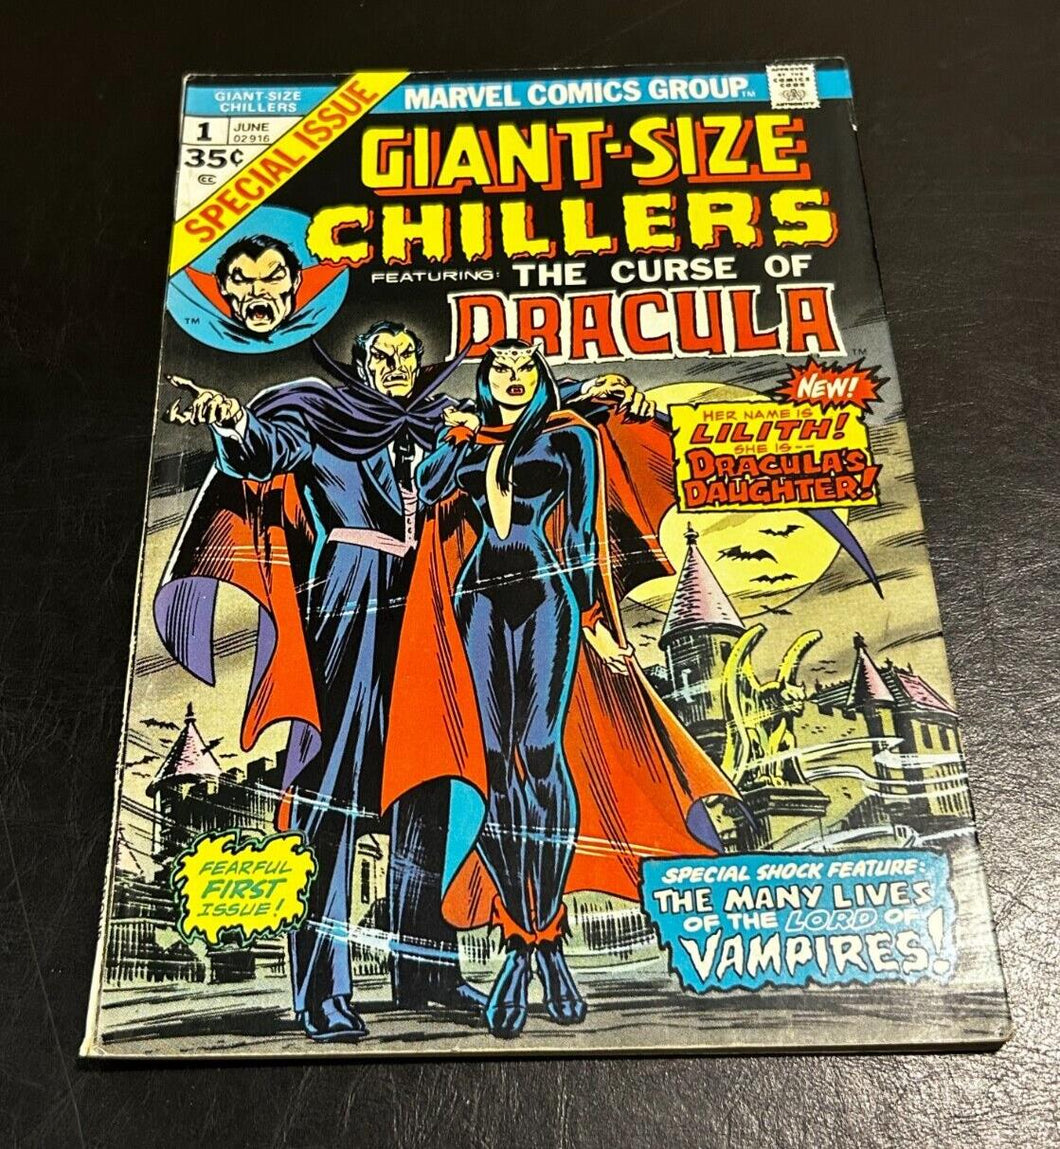 1974 Marvel Comics Giant Size Chillers Issue 1, VG+ 5.0